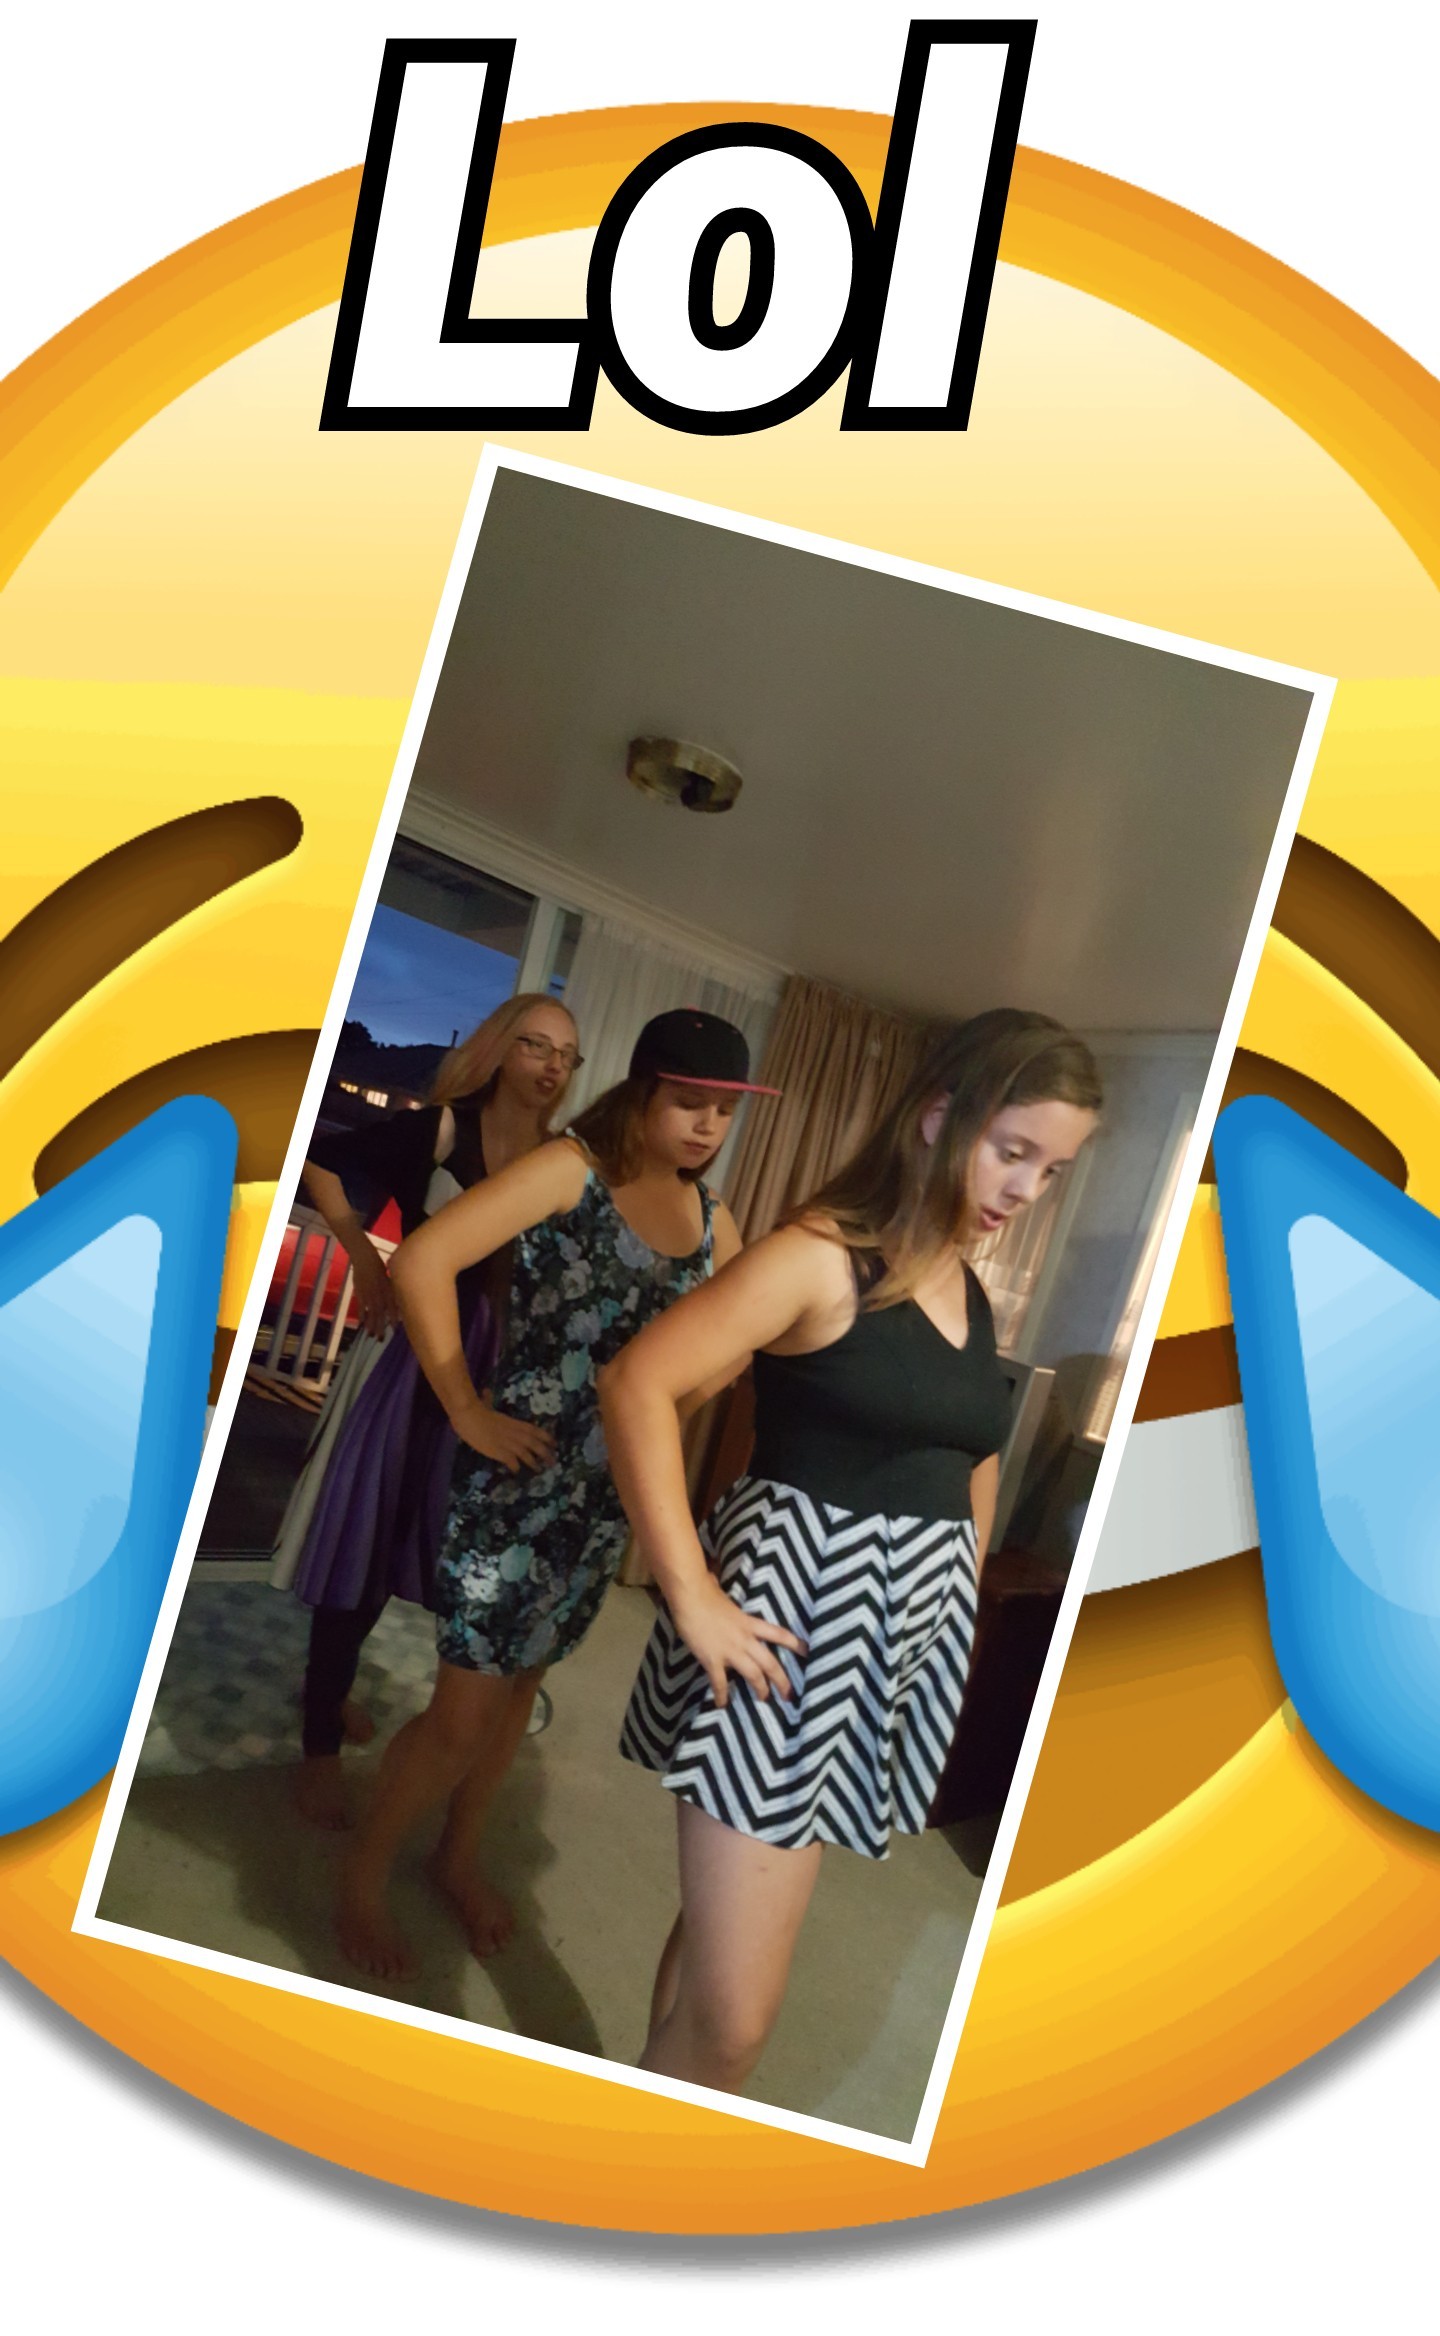 My Sister's birthday with her and her friends dancing